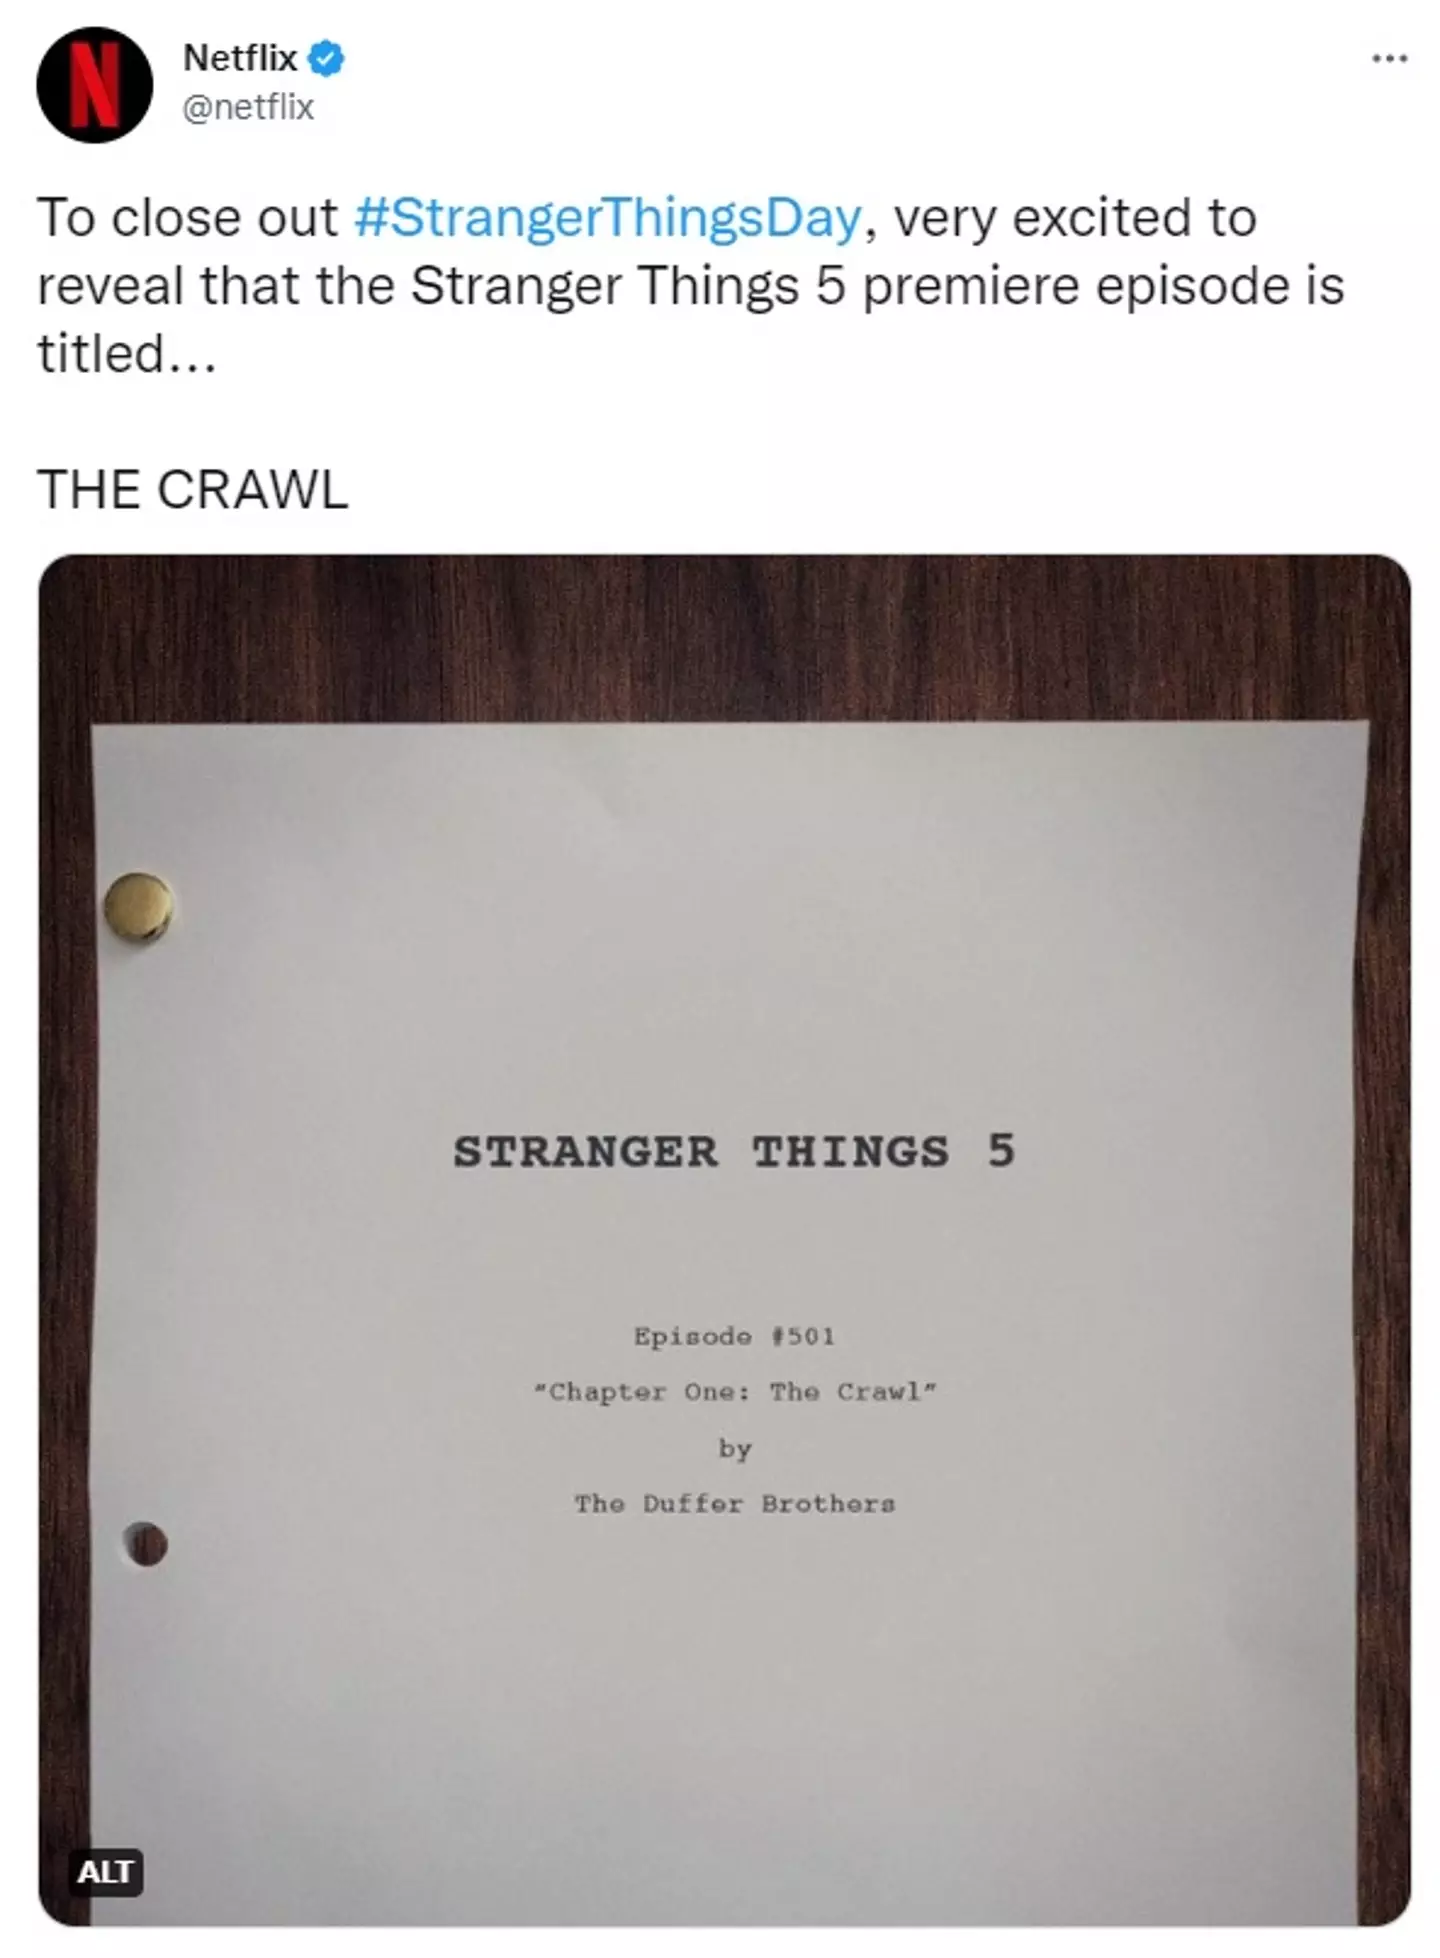 We know the title of the first new episode of Stranger Things.